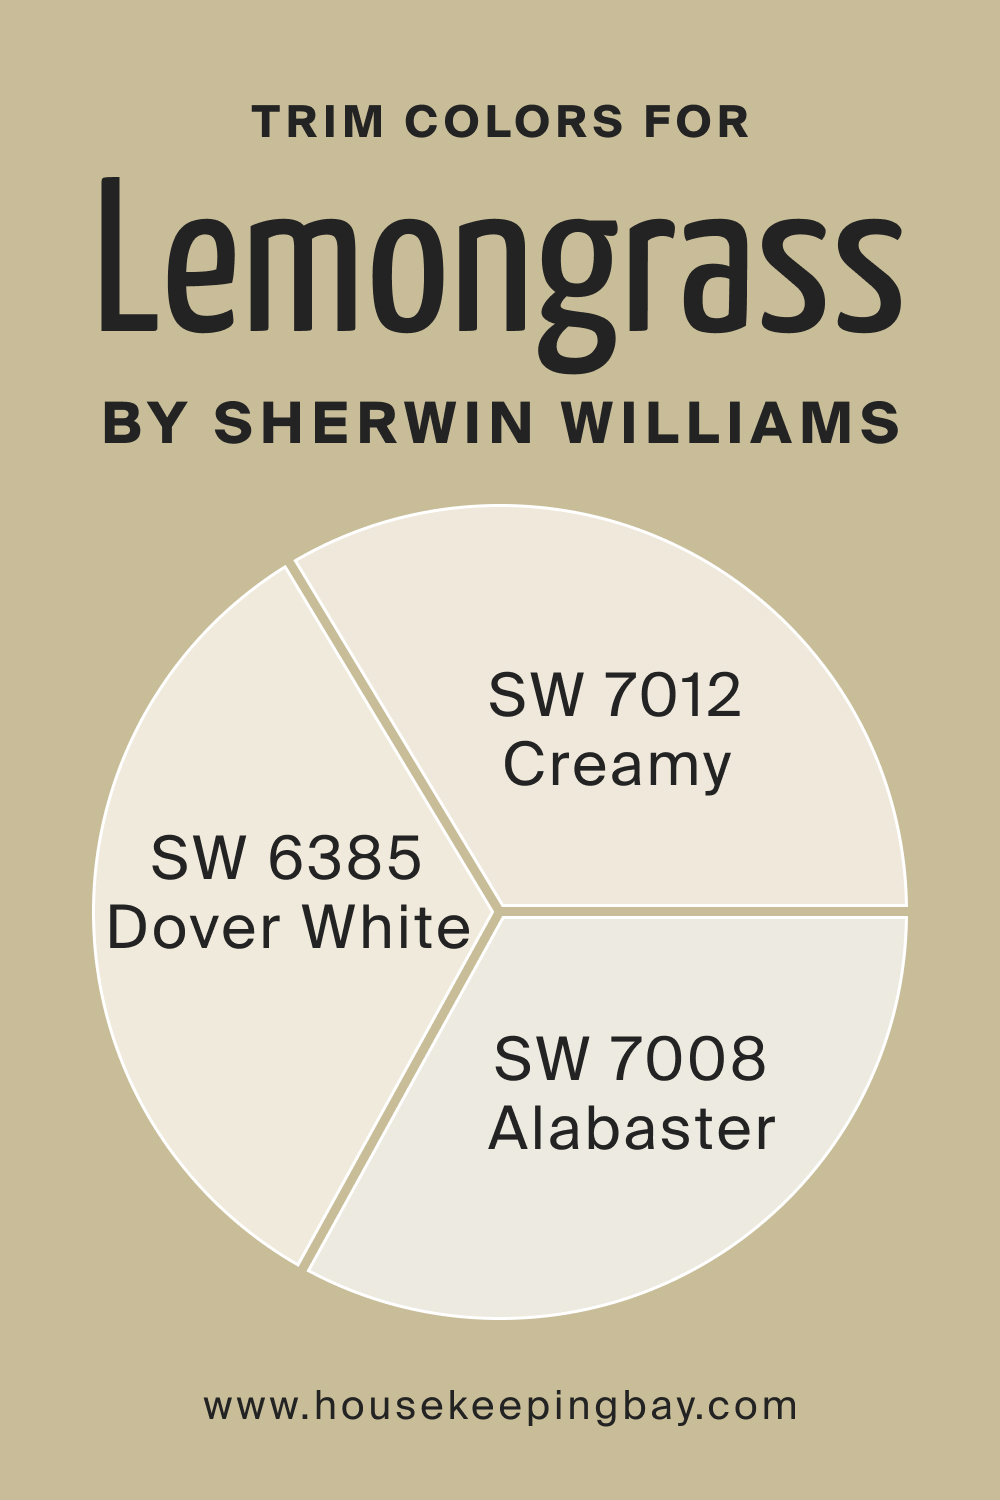 Trim Colors of SW 7732 Lemongrass by Sherwin Williams